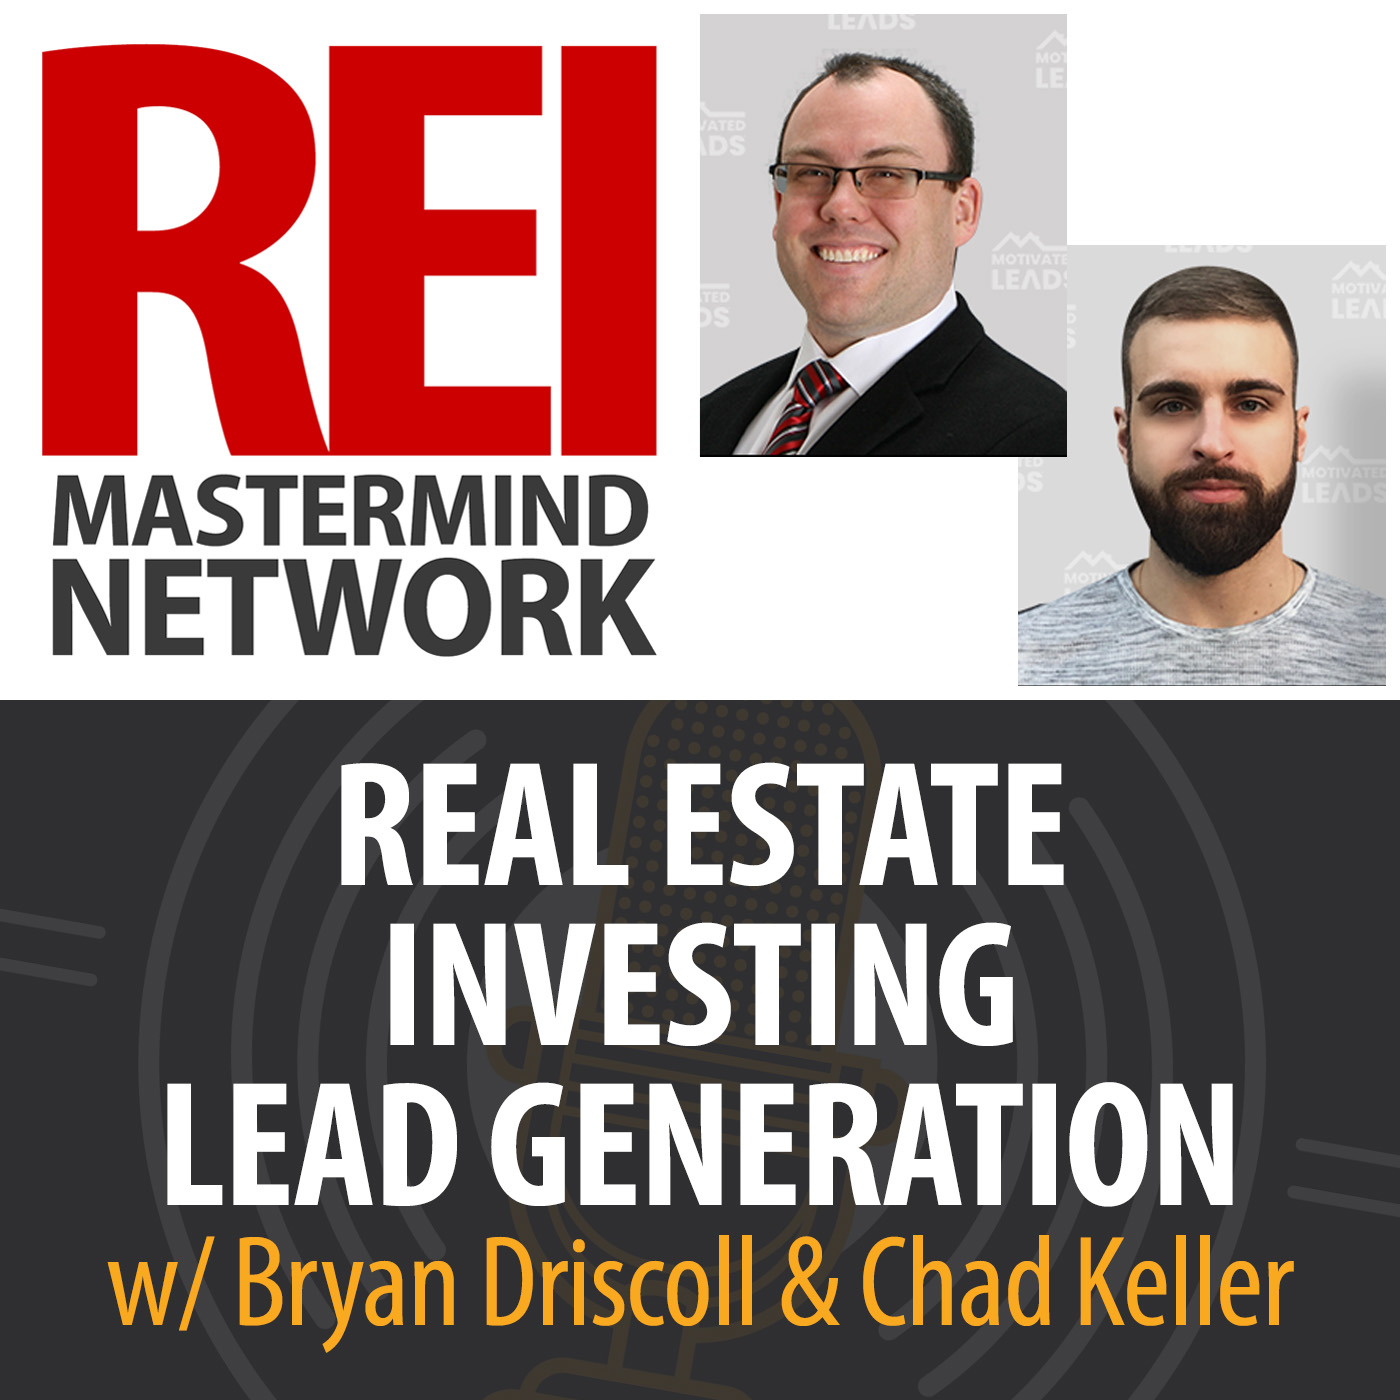 Real Estate Investing Lead Generation with Bryan Driscoll and Chad Keller Image